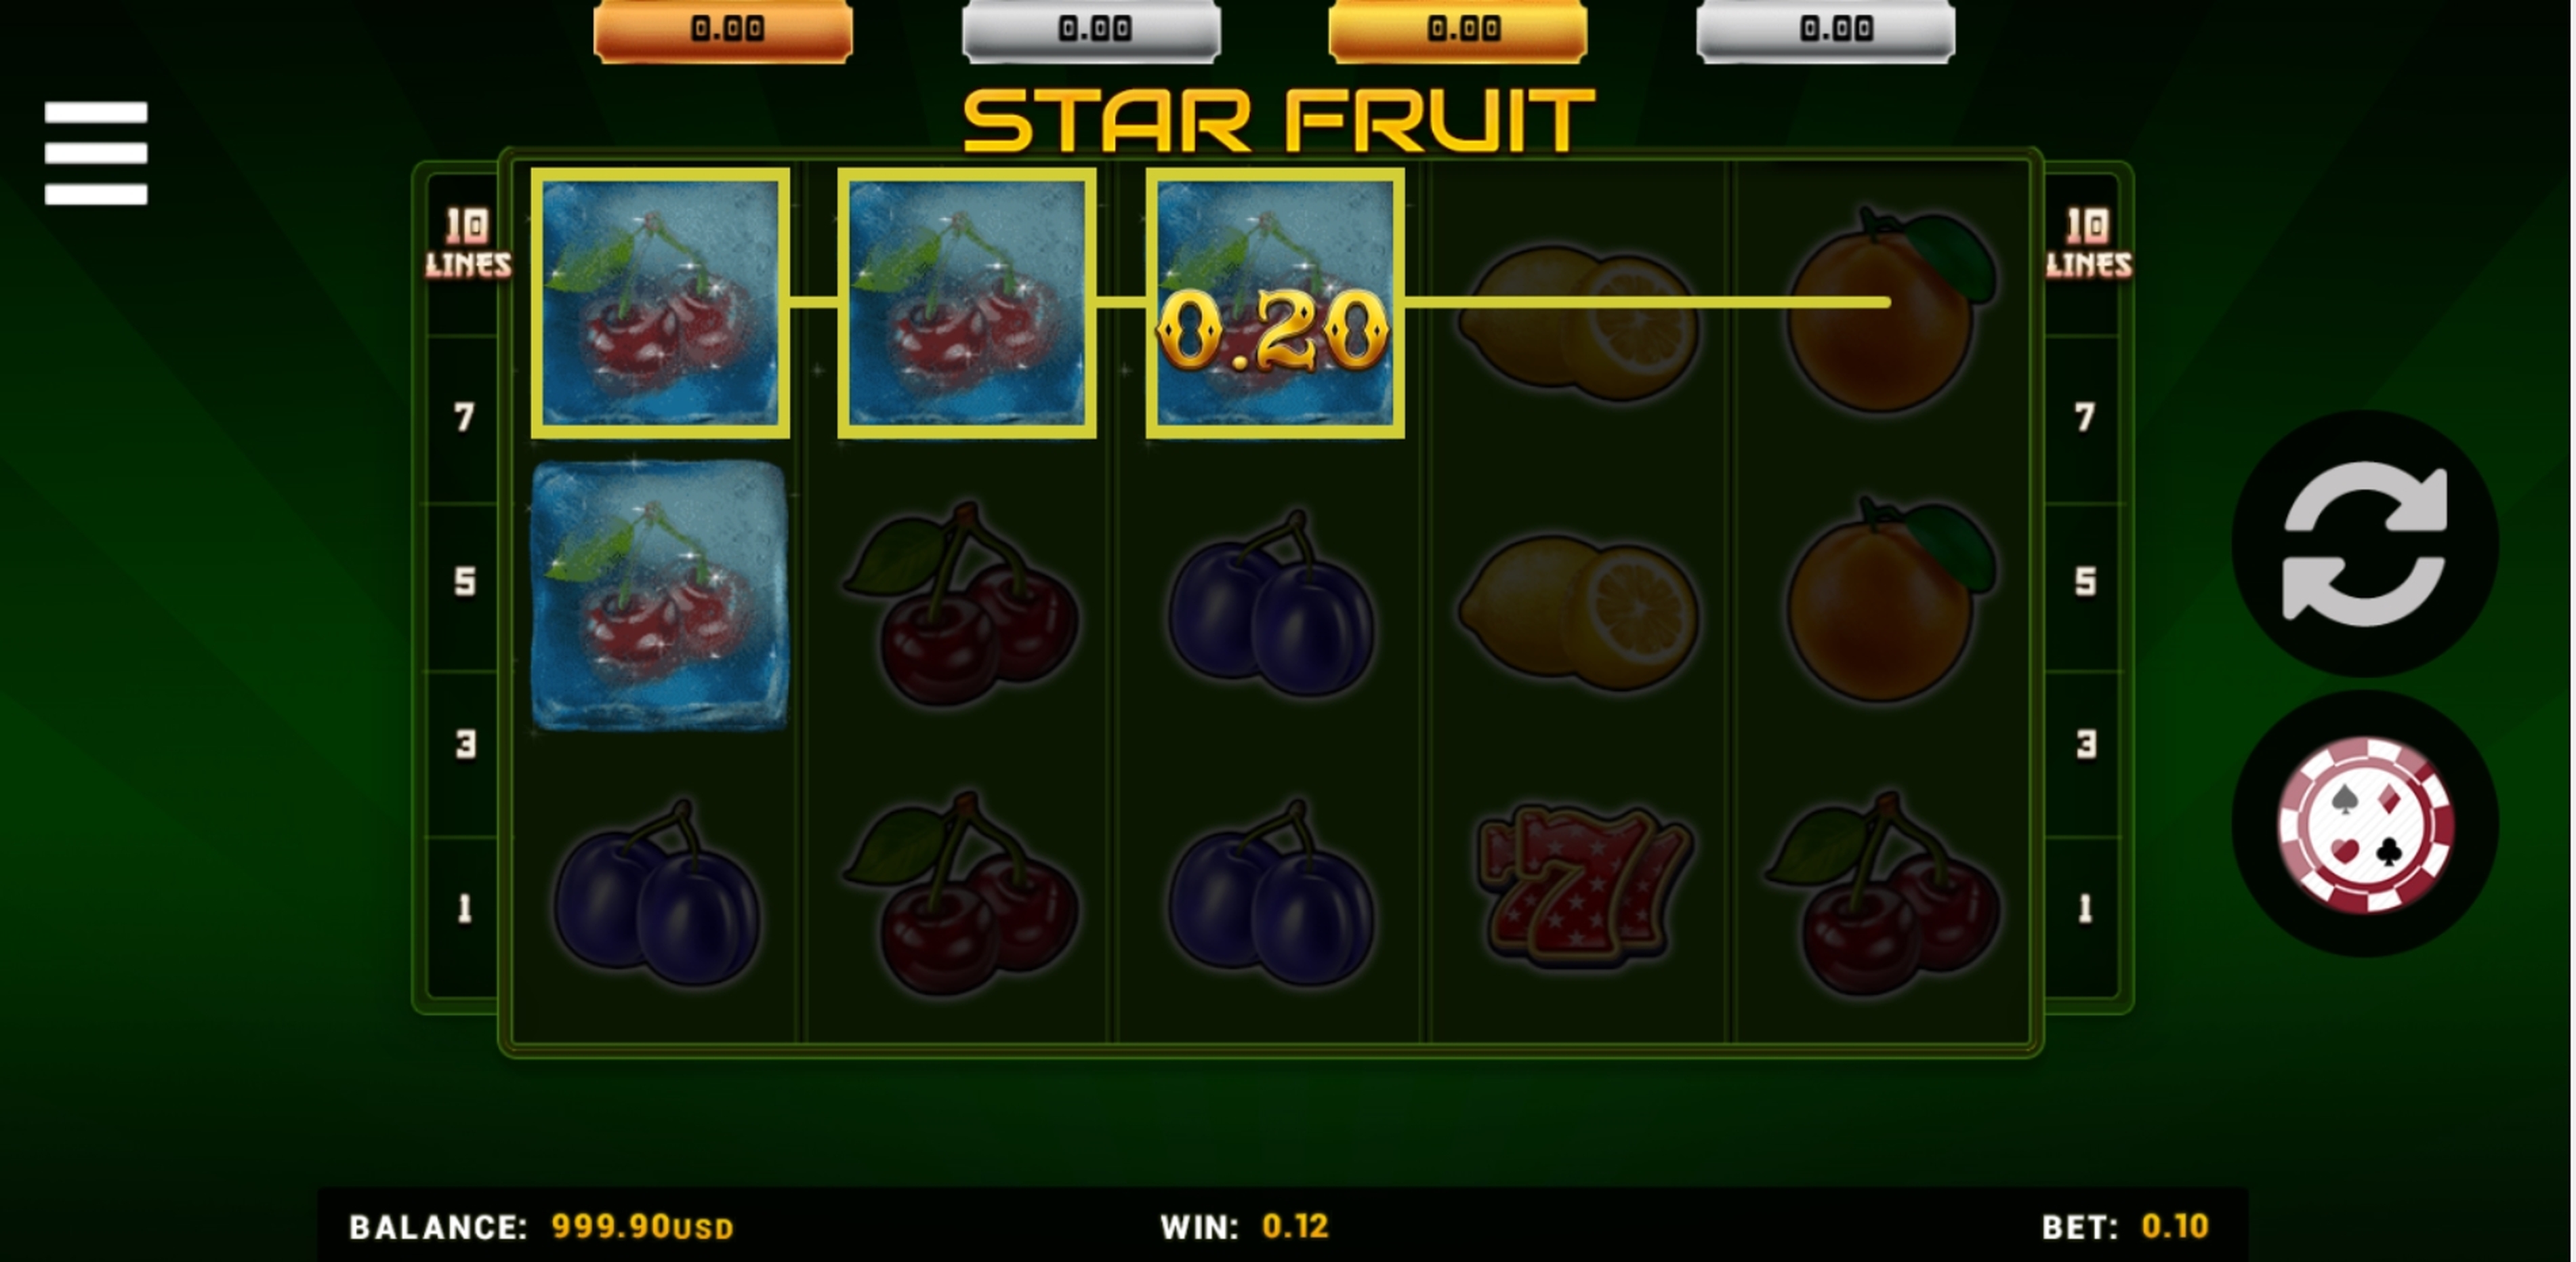 Win Money in Star Fruit Free Slot Game by Betsense